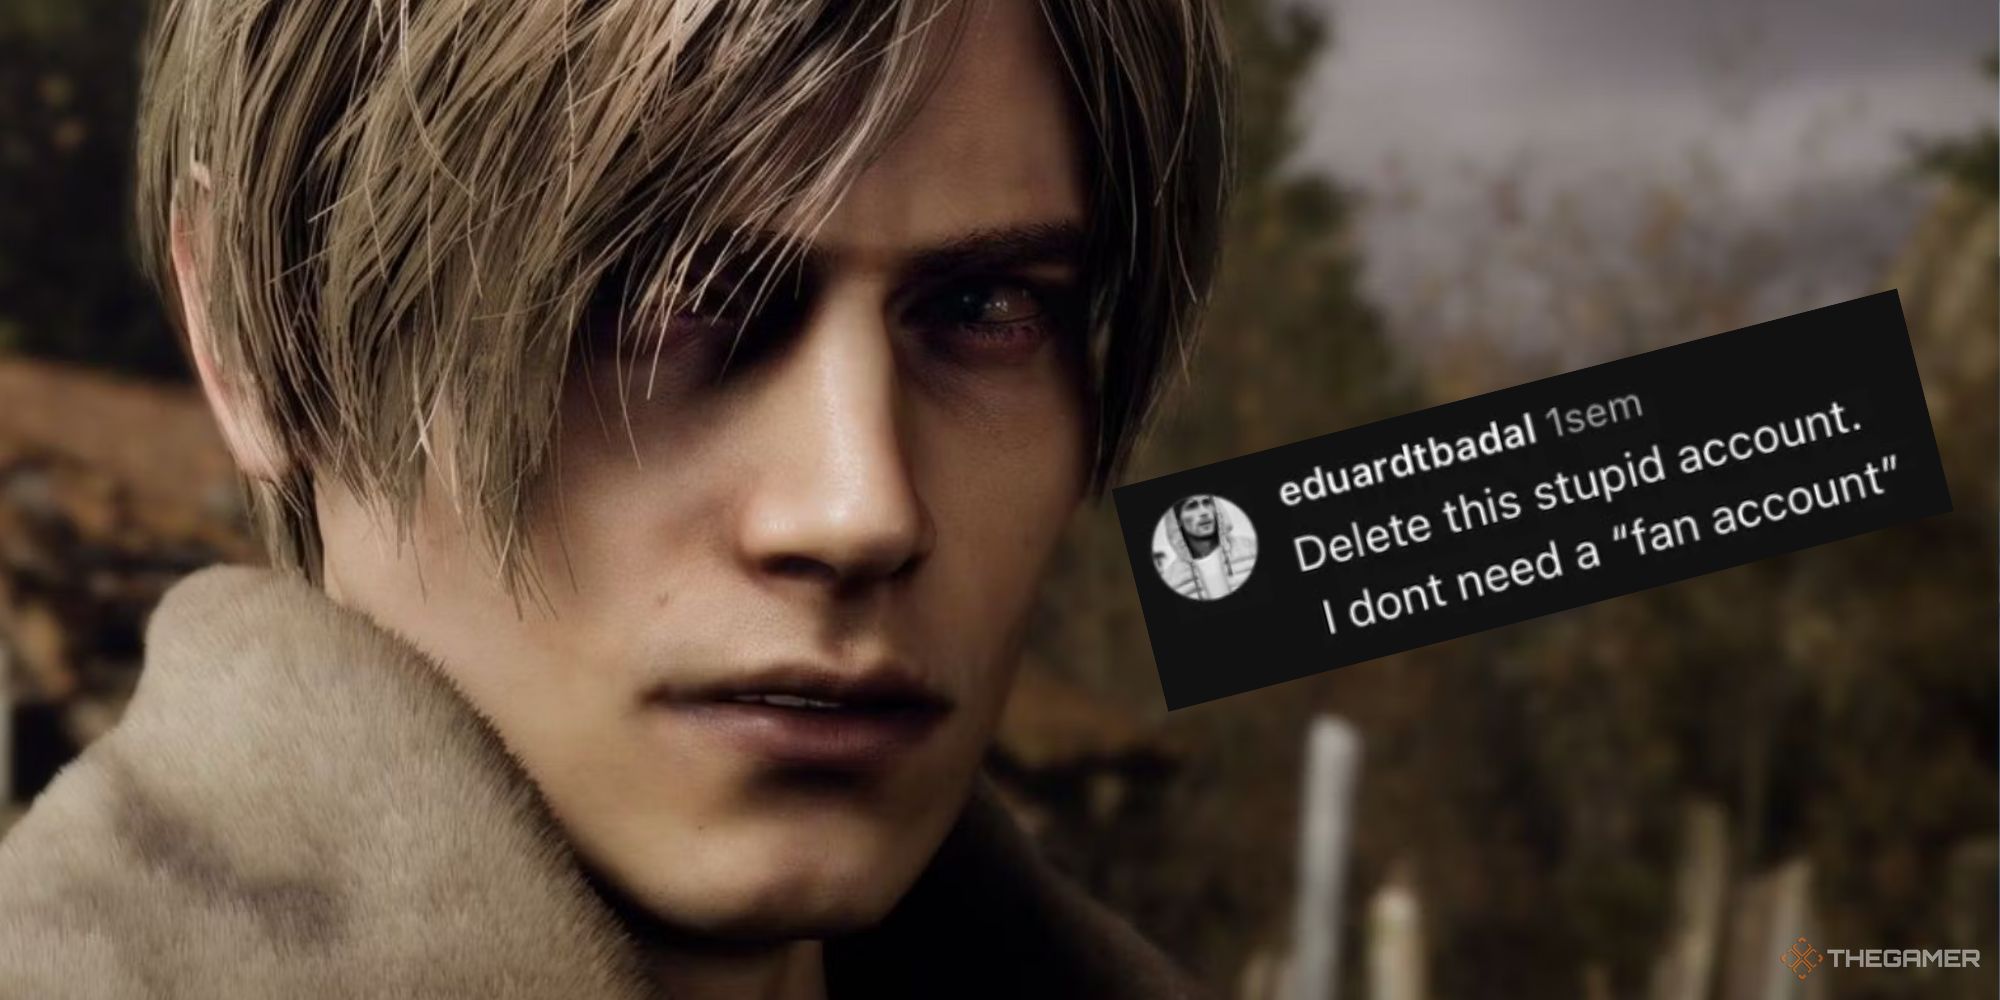 Eduard Badaluta, face model for Leon Kennedy had to private his